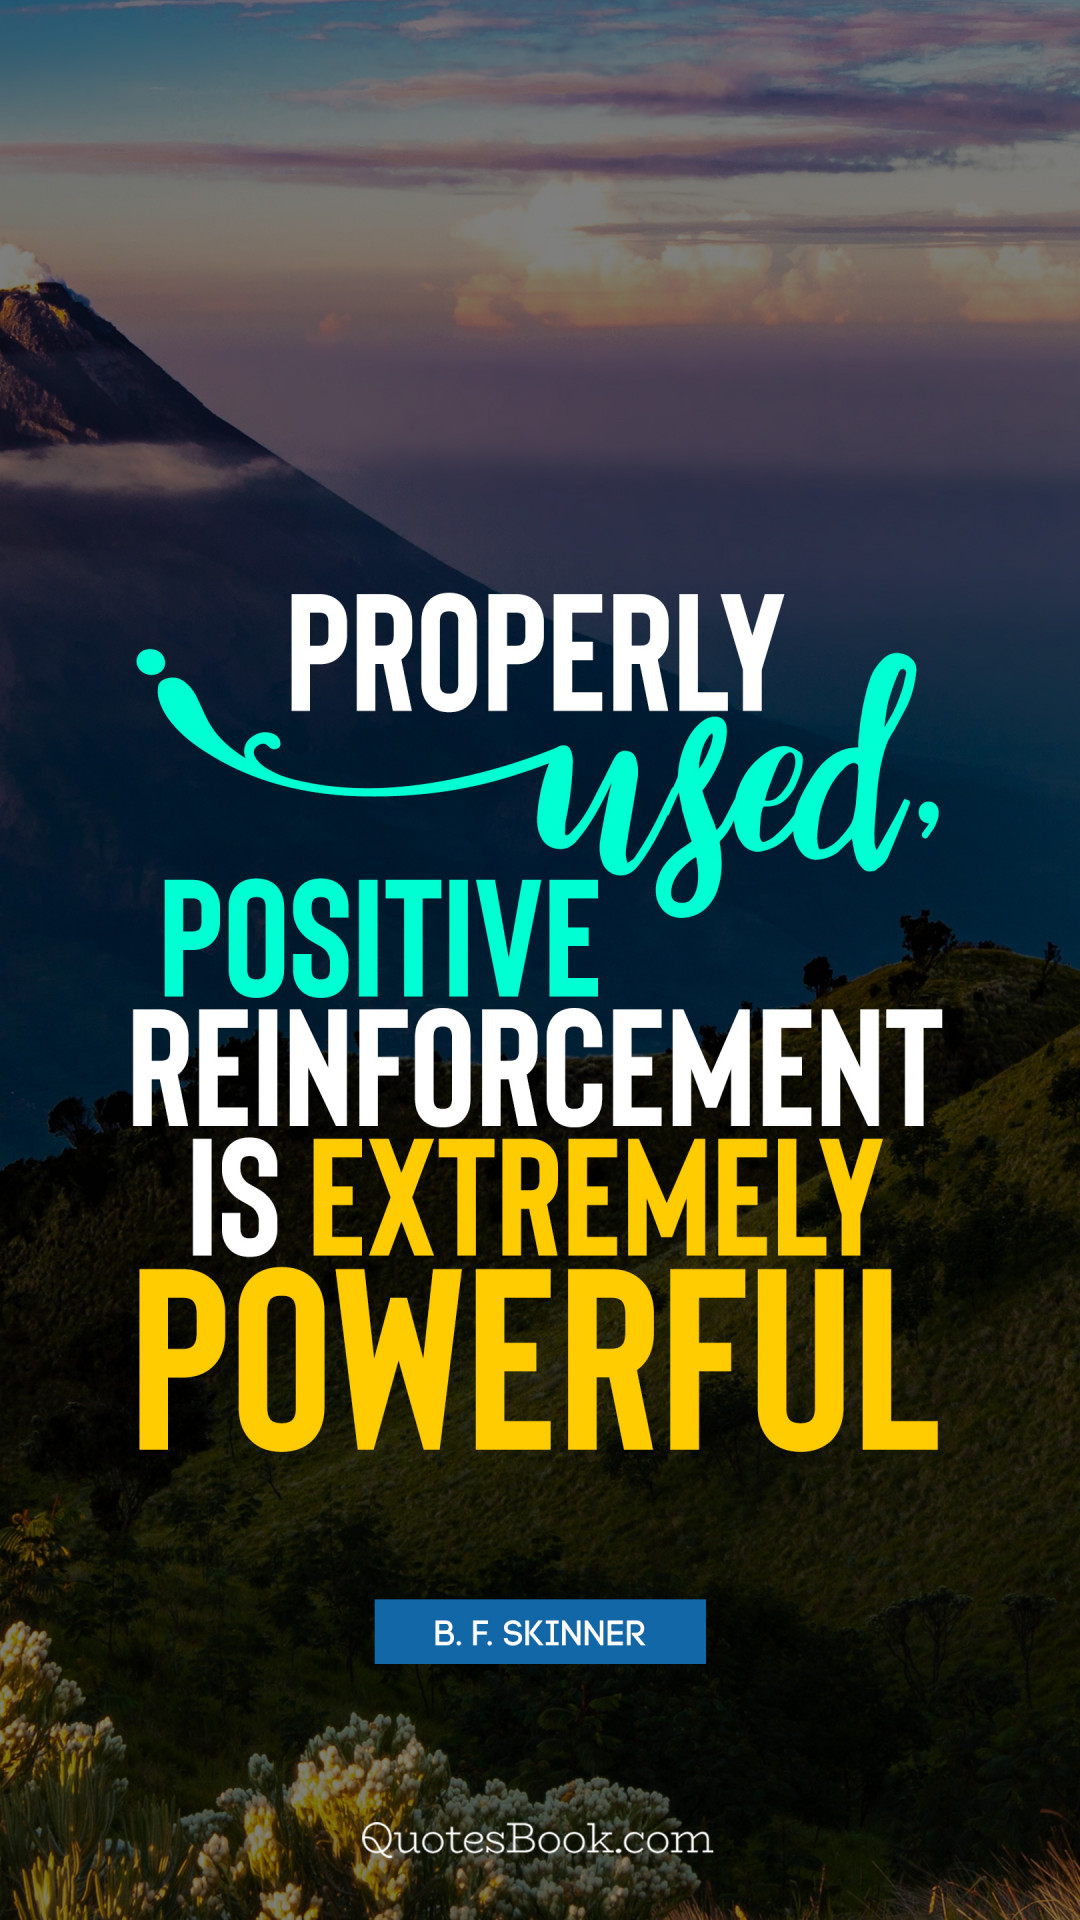 Properly used, positive reinforcement is extremely powerful. - Quote by